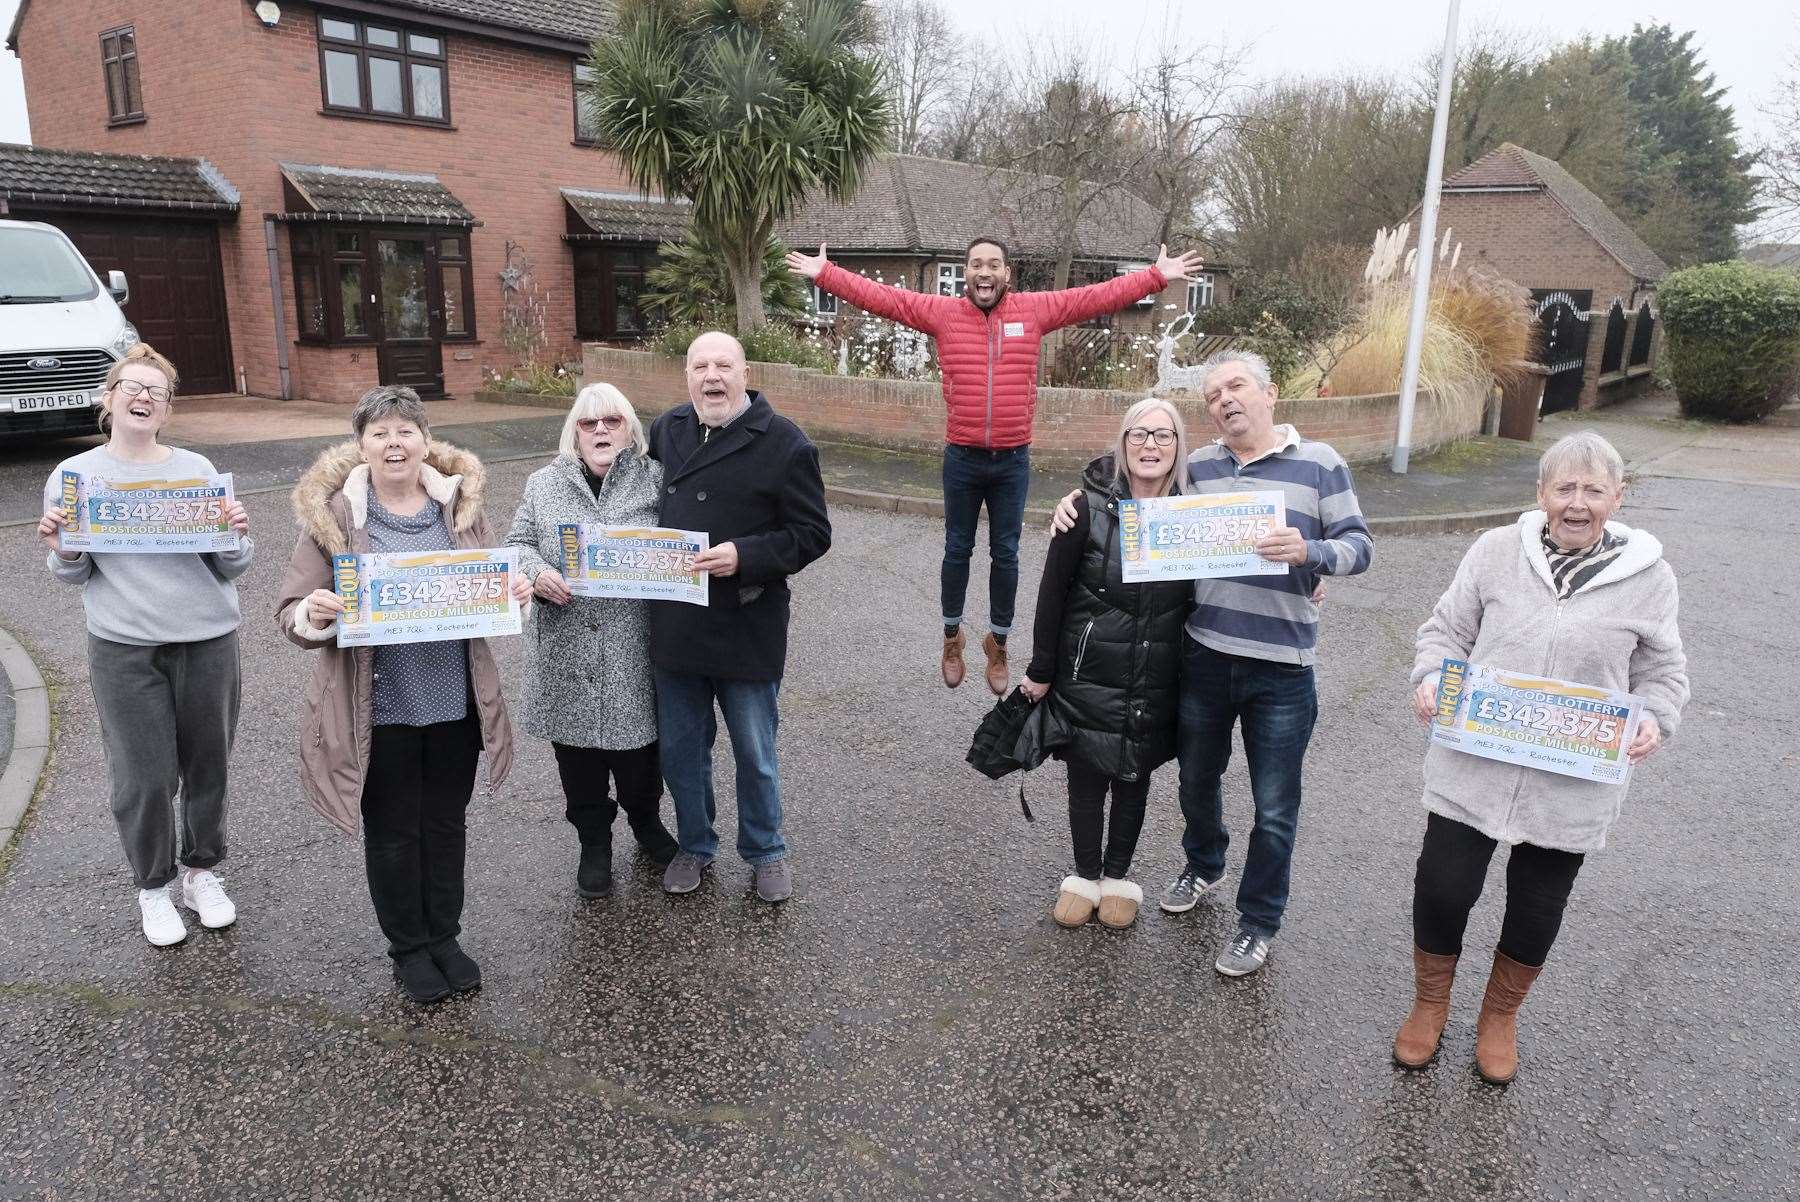 Winners in the People's Postcode Lottery in Cliffe, near Rochester are celebrating an early Christmas present after winning in the People's Postcode Lottery splitting a prize pot of £8.4m. Picture: People's Postcode Lottery